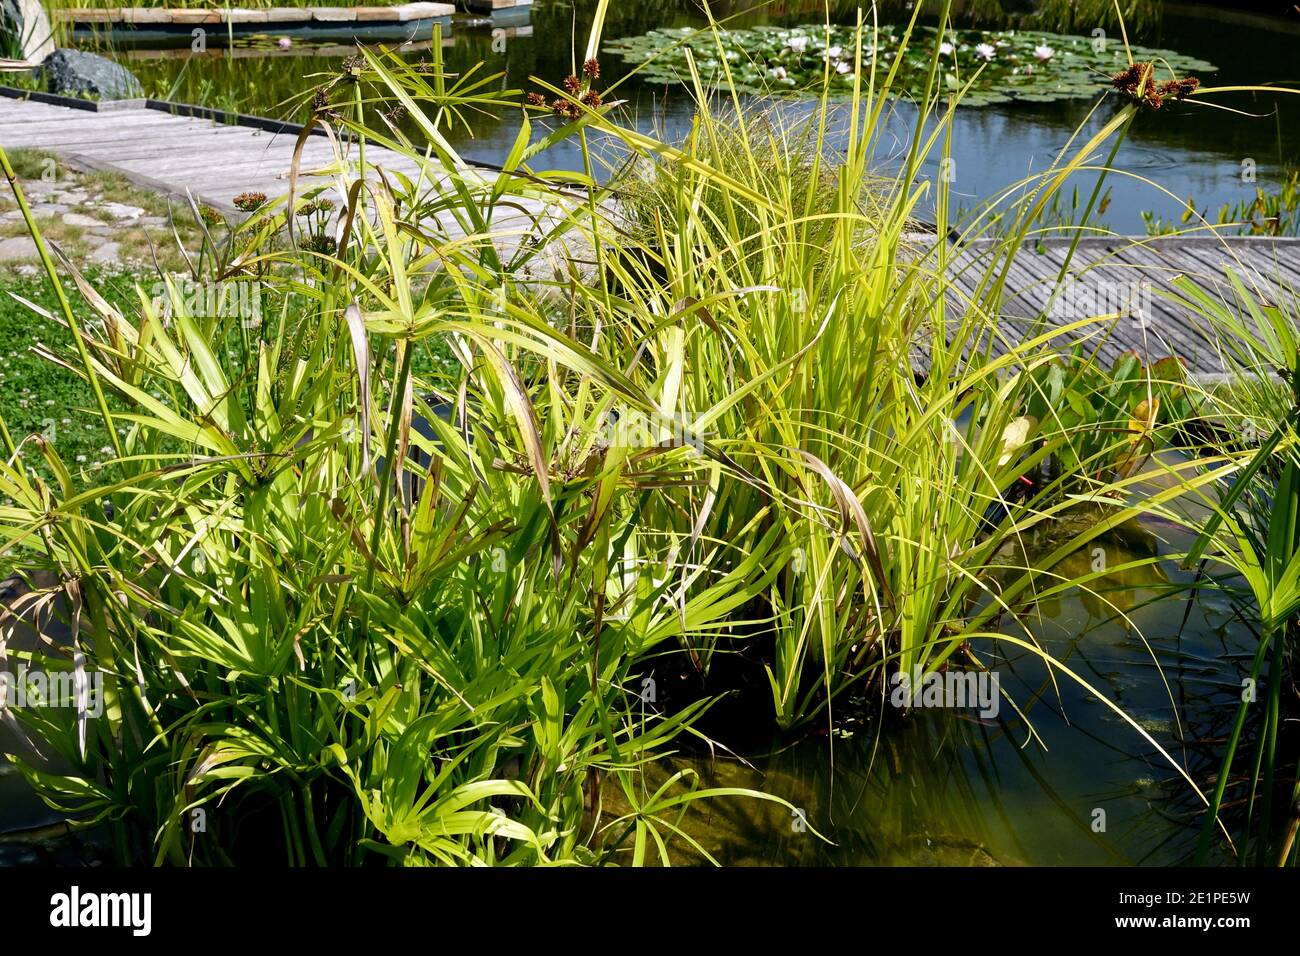 Aquatic plants growing in a container and scenery of a wooden footpath around a garden pond Stock Photo